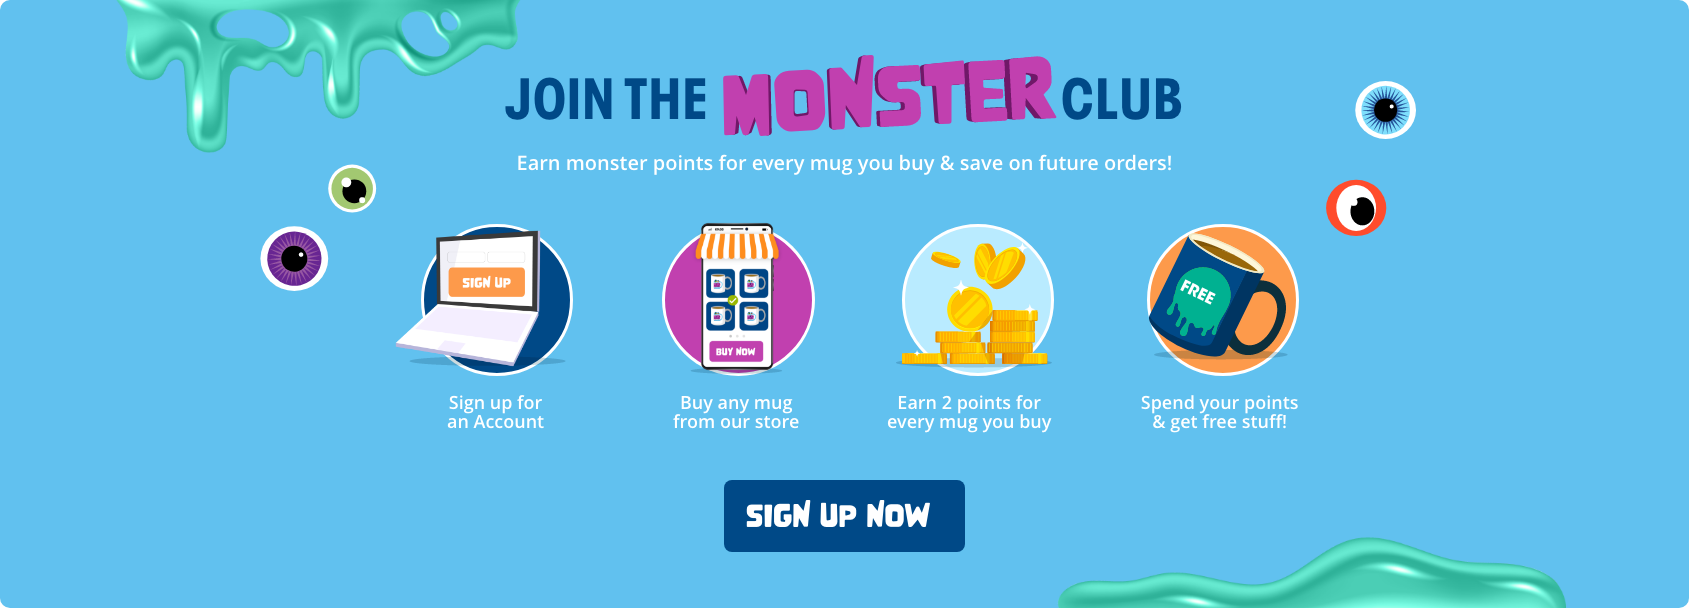 Register now to join the monster club